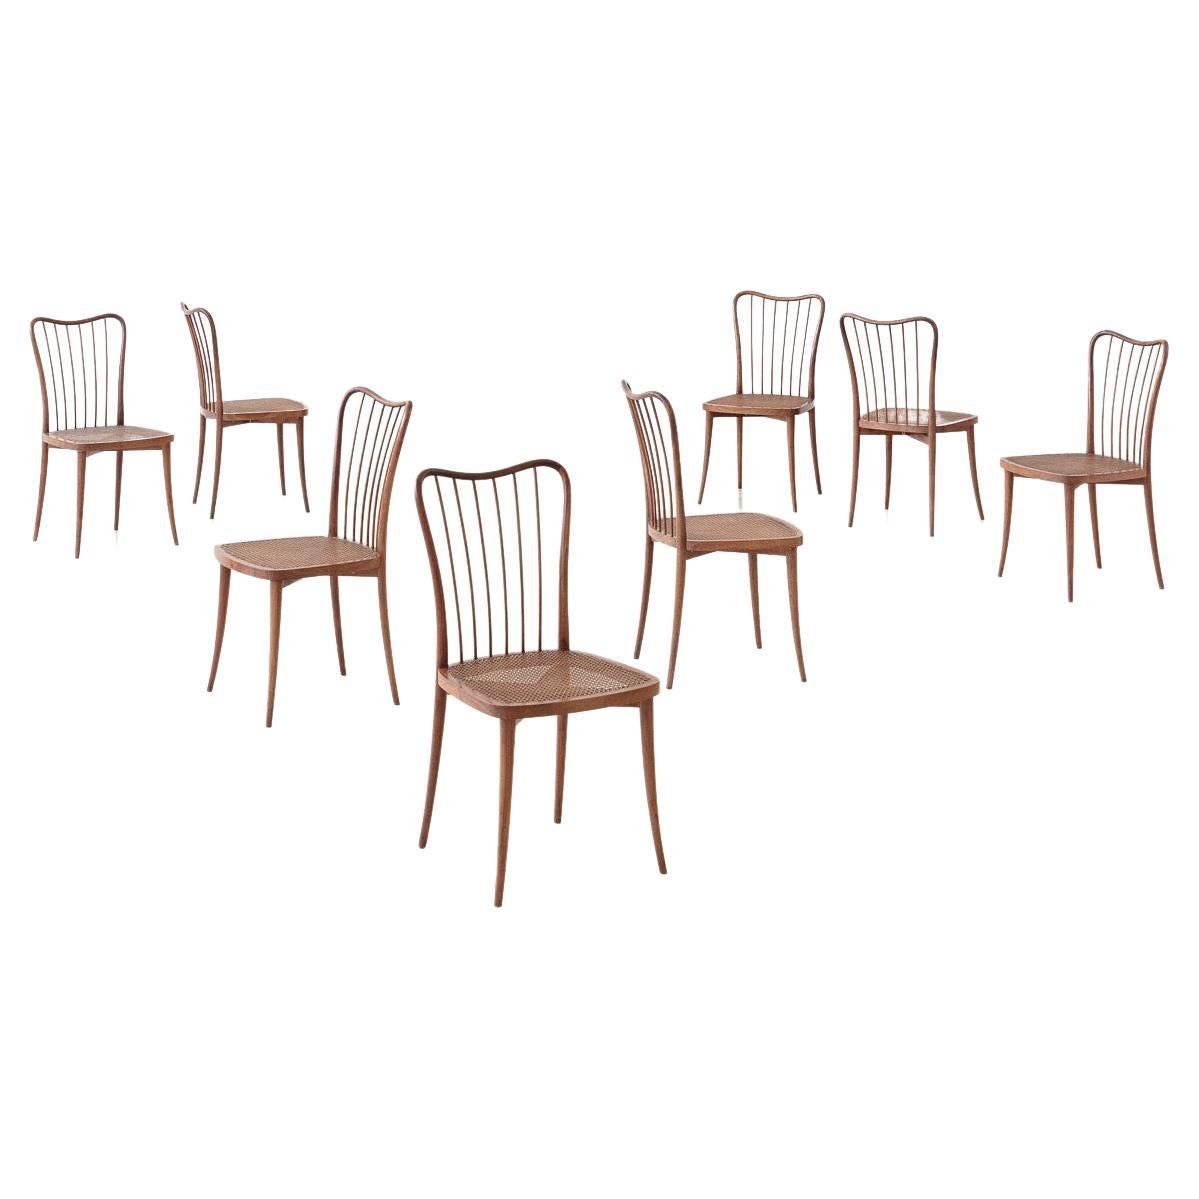 Set of Eight Dining Chairs by Joaquim Tenreiro, Solid Wood and Cane, 1950s For Sale